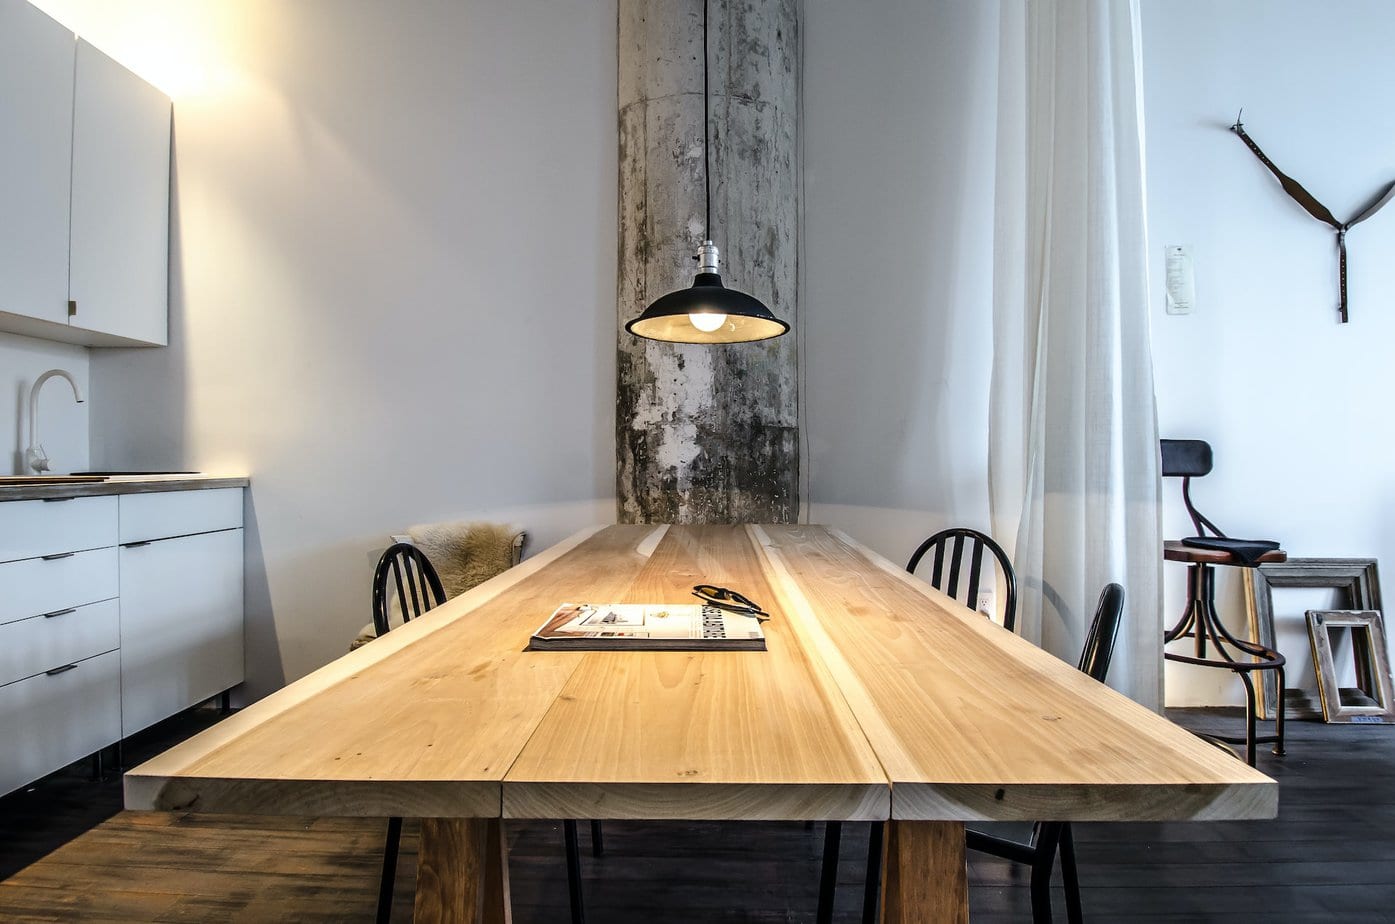 Dining in Style: An Eco-Friendly Dining Table Handmade Just for You